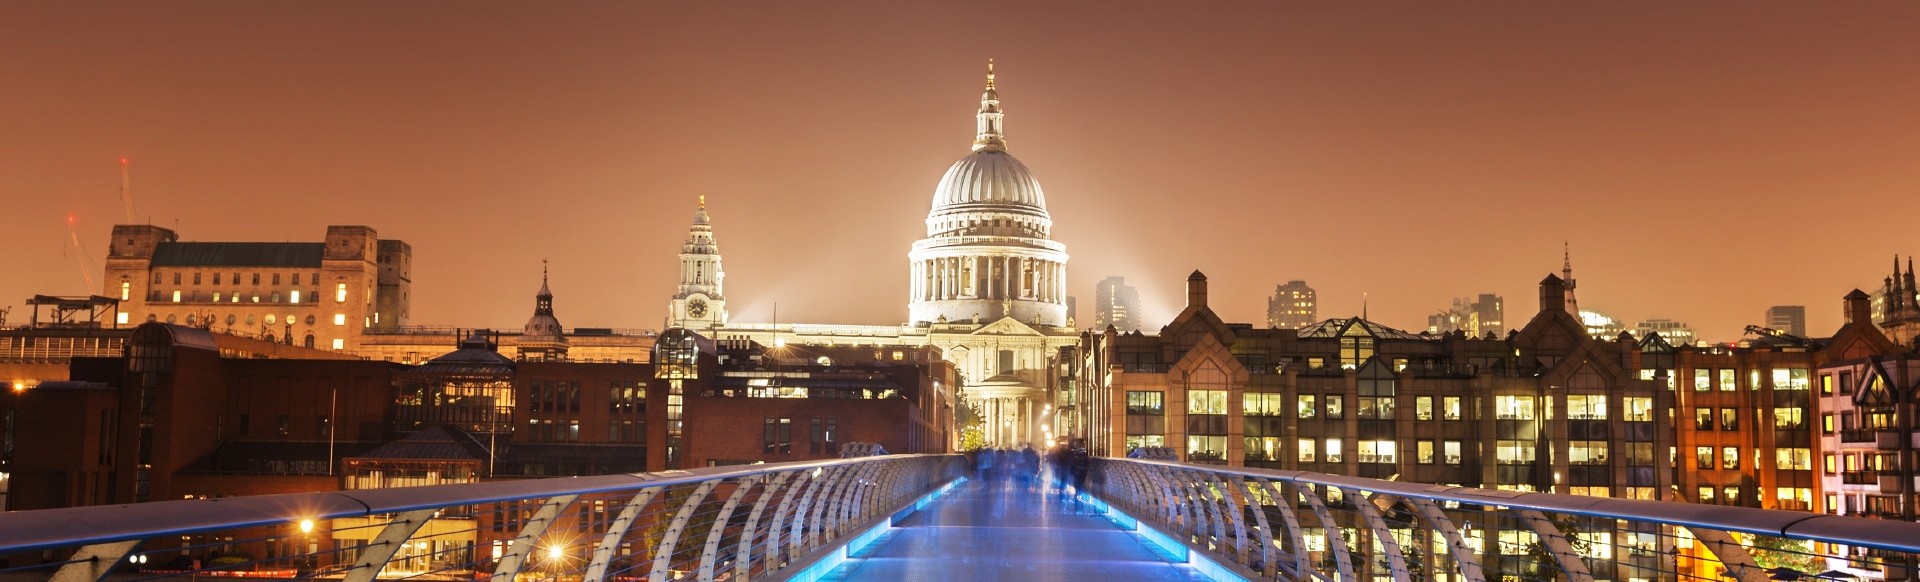 View of St Paul's cathedral from Millennium Bridge at night.